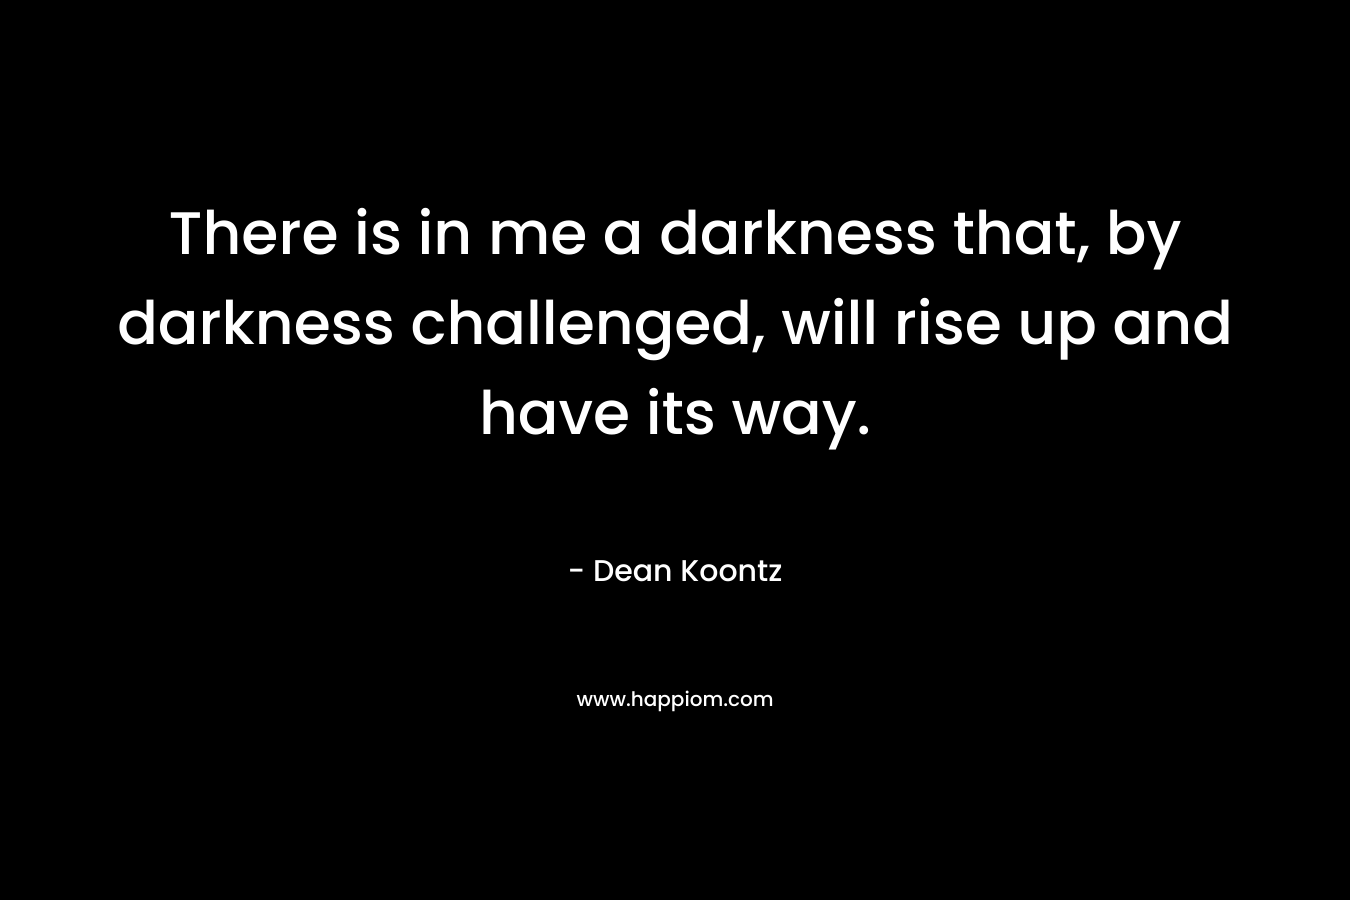 There is in me a darkness that, by darkness challenged, will rise up and have its way. – Dean Koontz